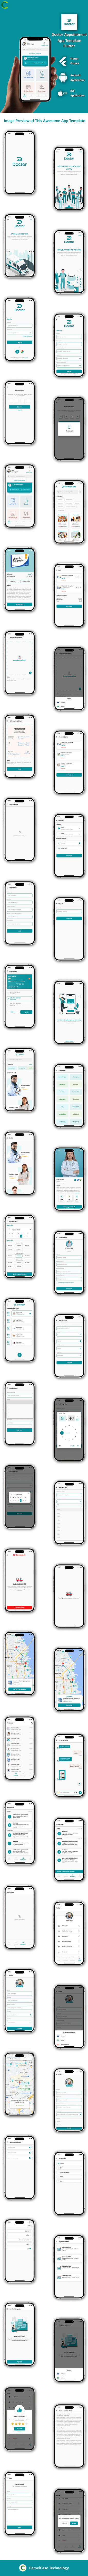 Doctor Appointment Booking Android App + iOS App Template in Flutter | DoctorPlus - 6